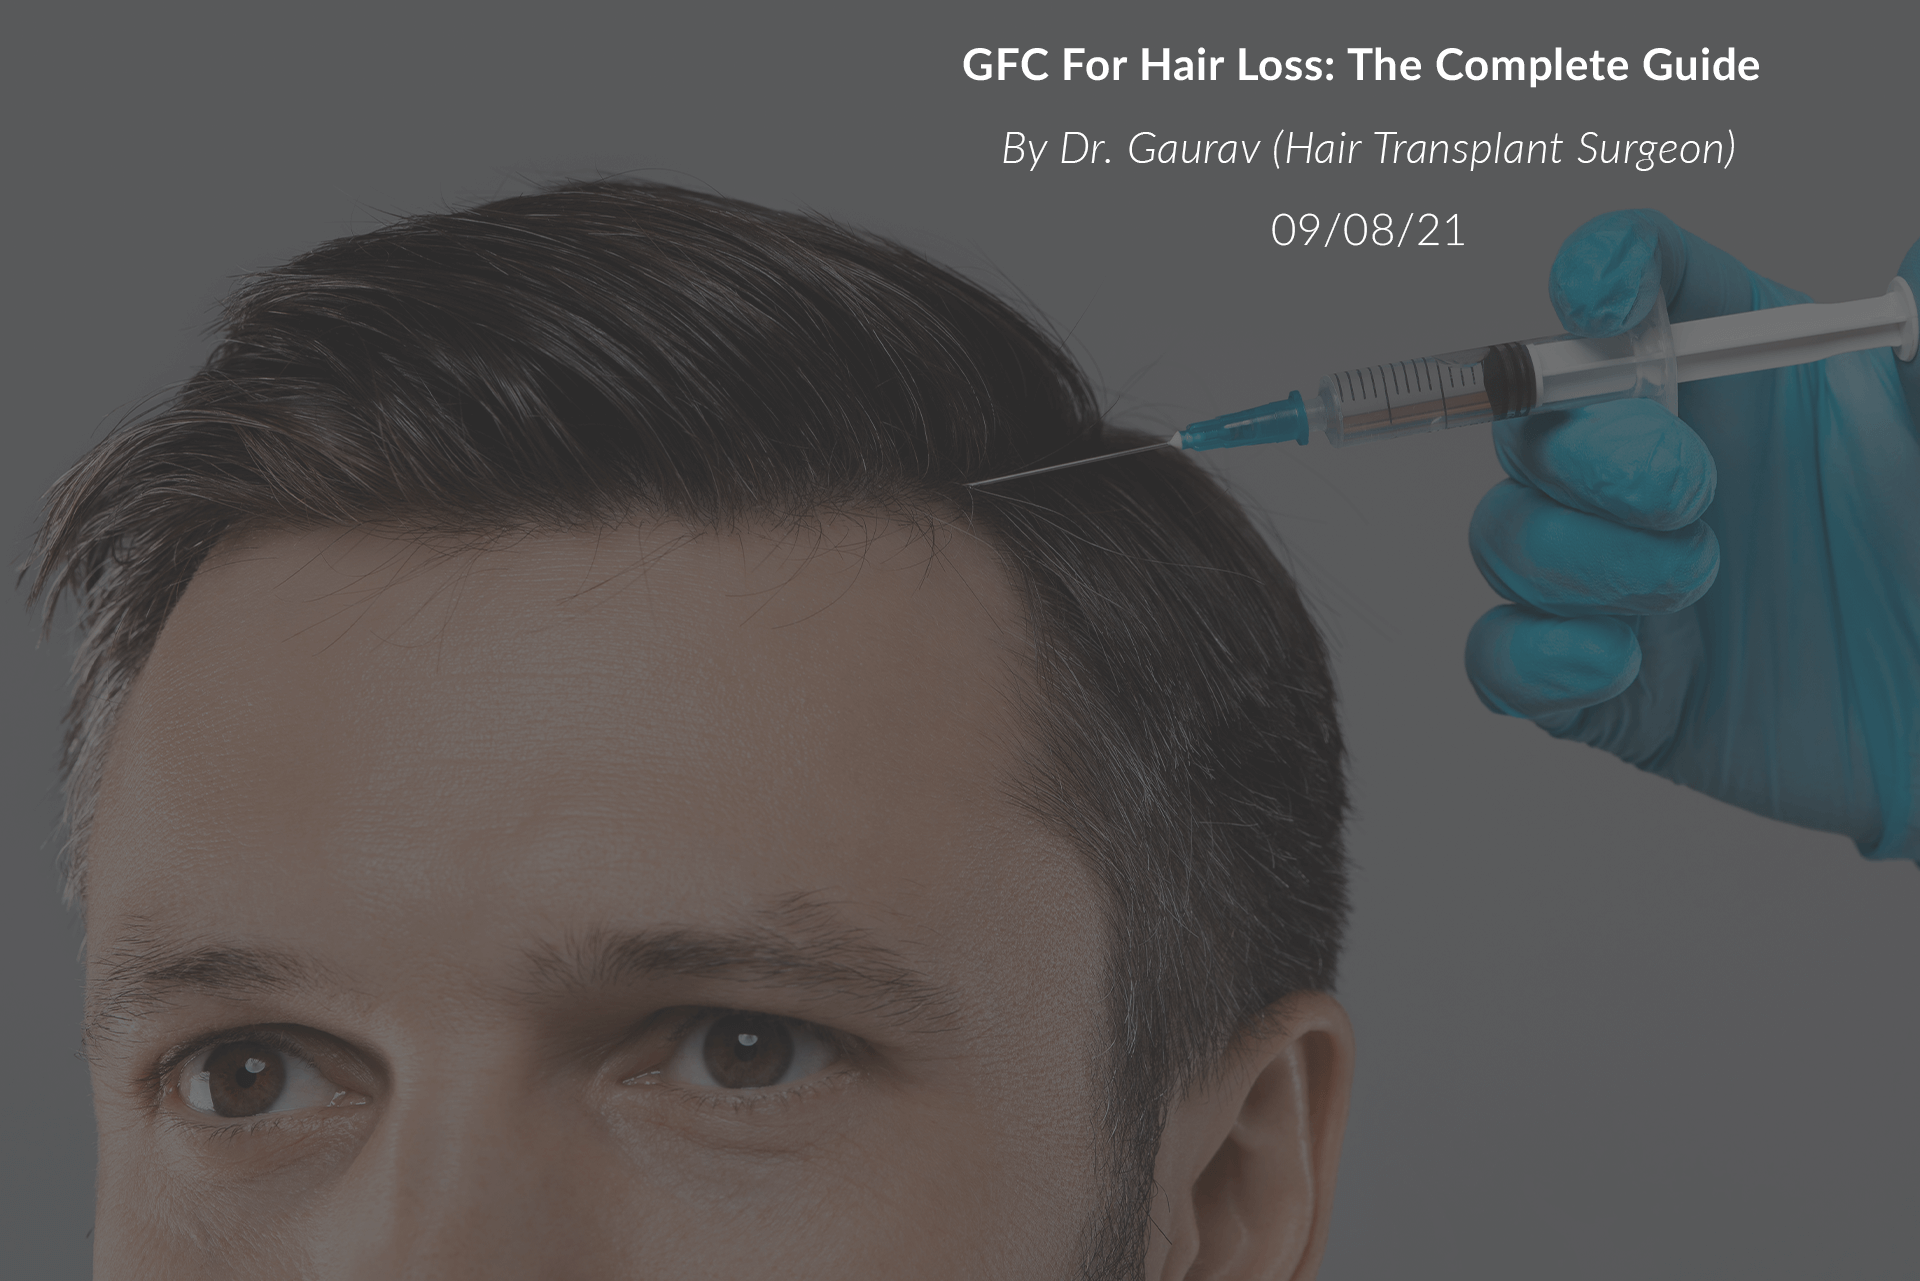 GFC Treatment for Hair Loss: The Complete Guide | GFC vs PRP